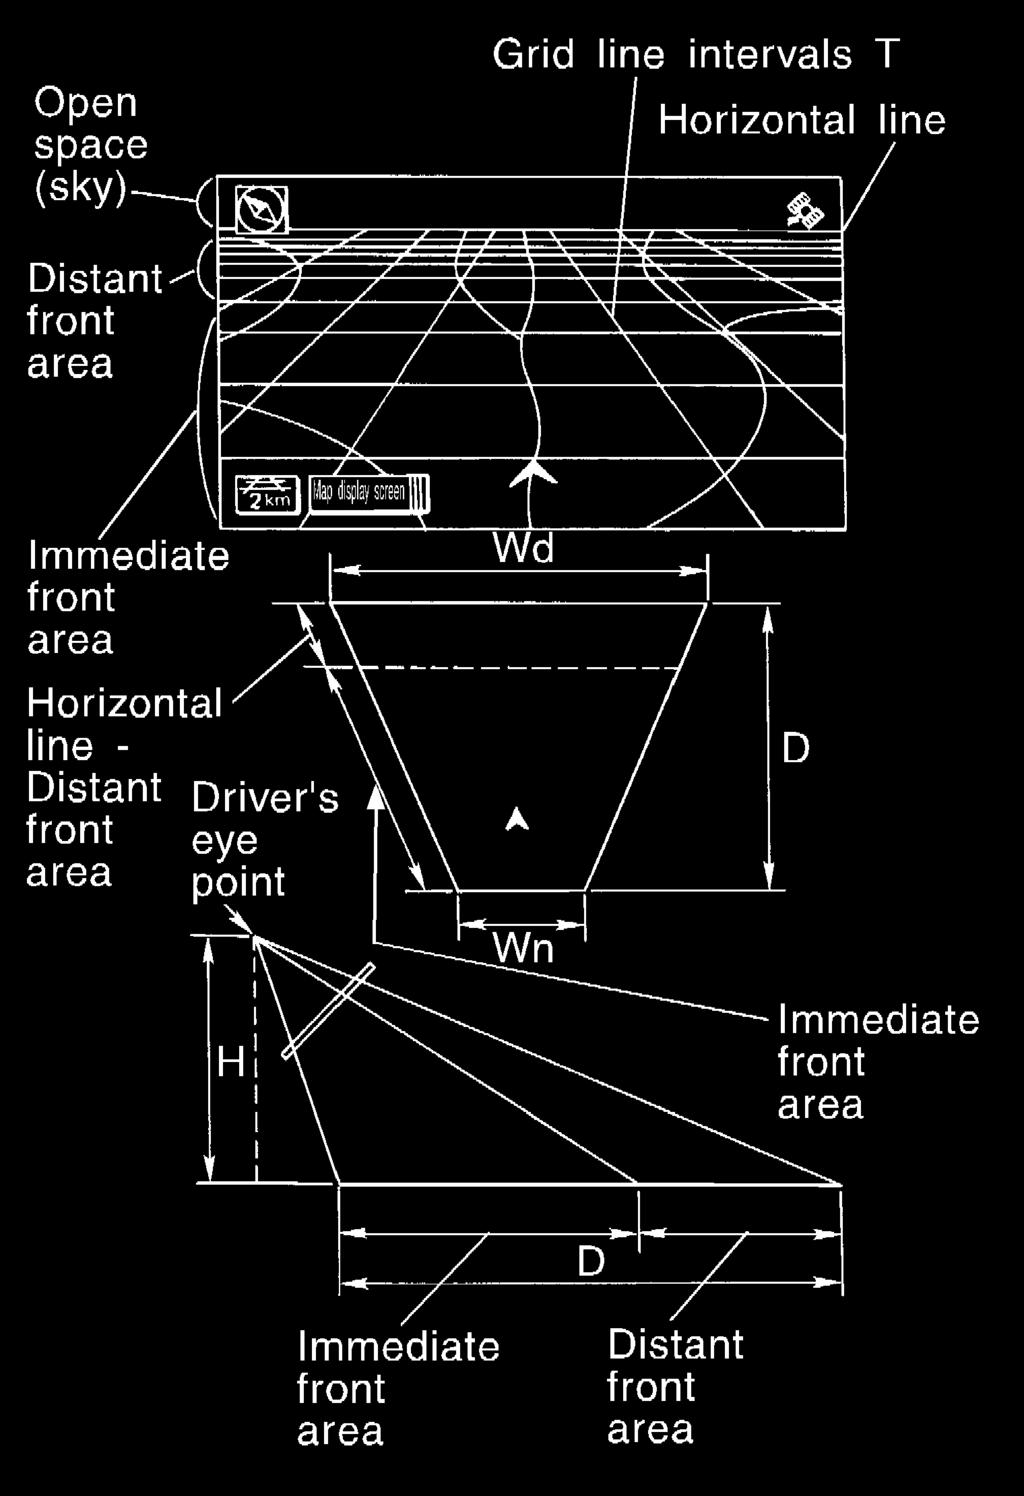 + Ten horizontal grid lines indicate display width while six vertical grid lines indicate display depth and direction. + Drawing line area shows open space, depth, and immediate front area.